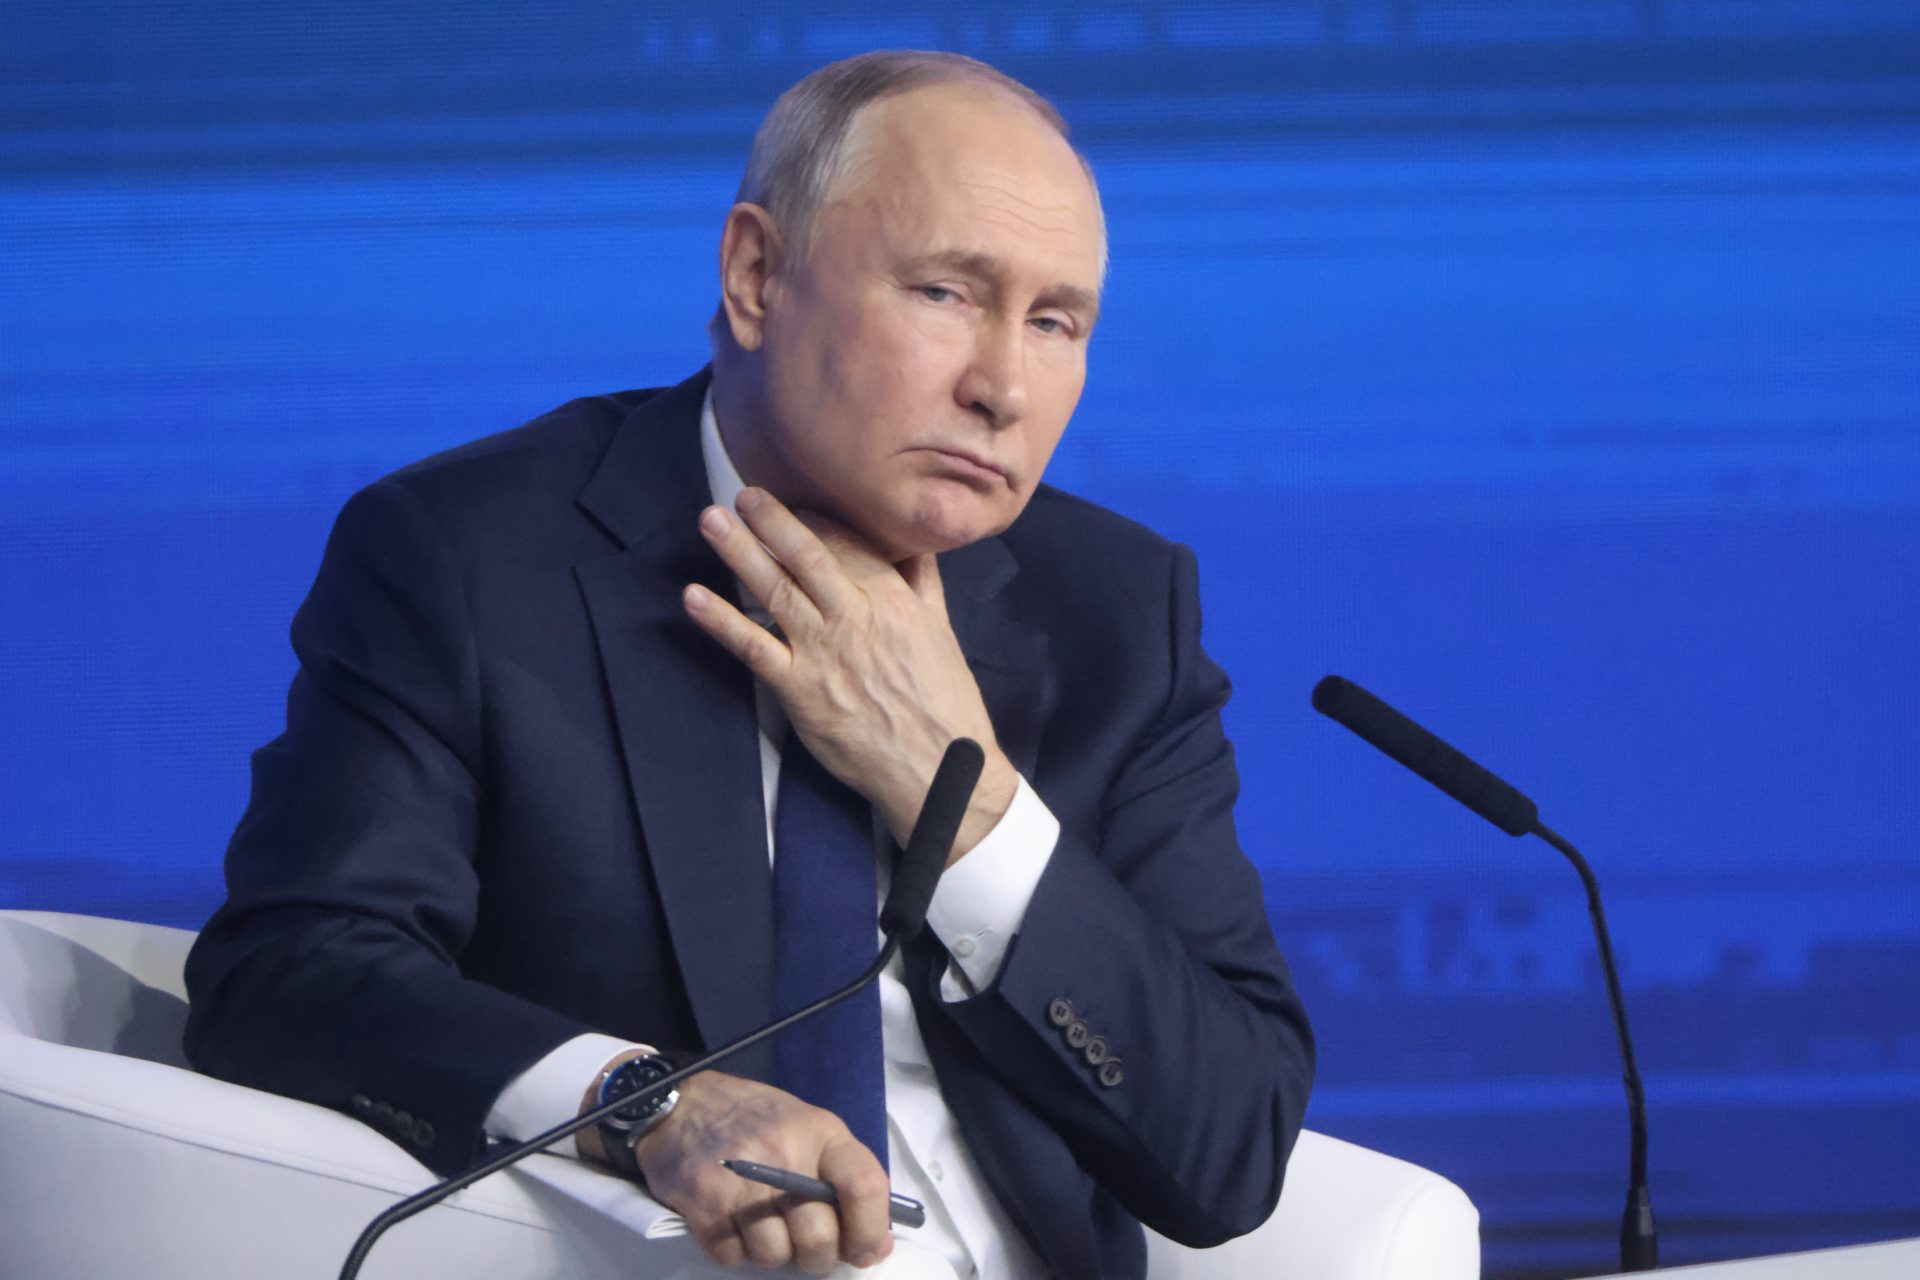 Putin revealed his wealth after registering to run for office again